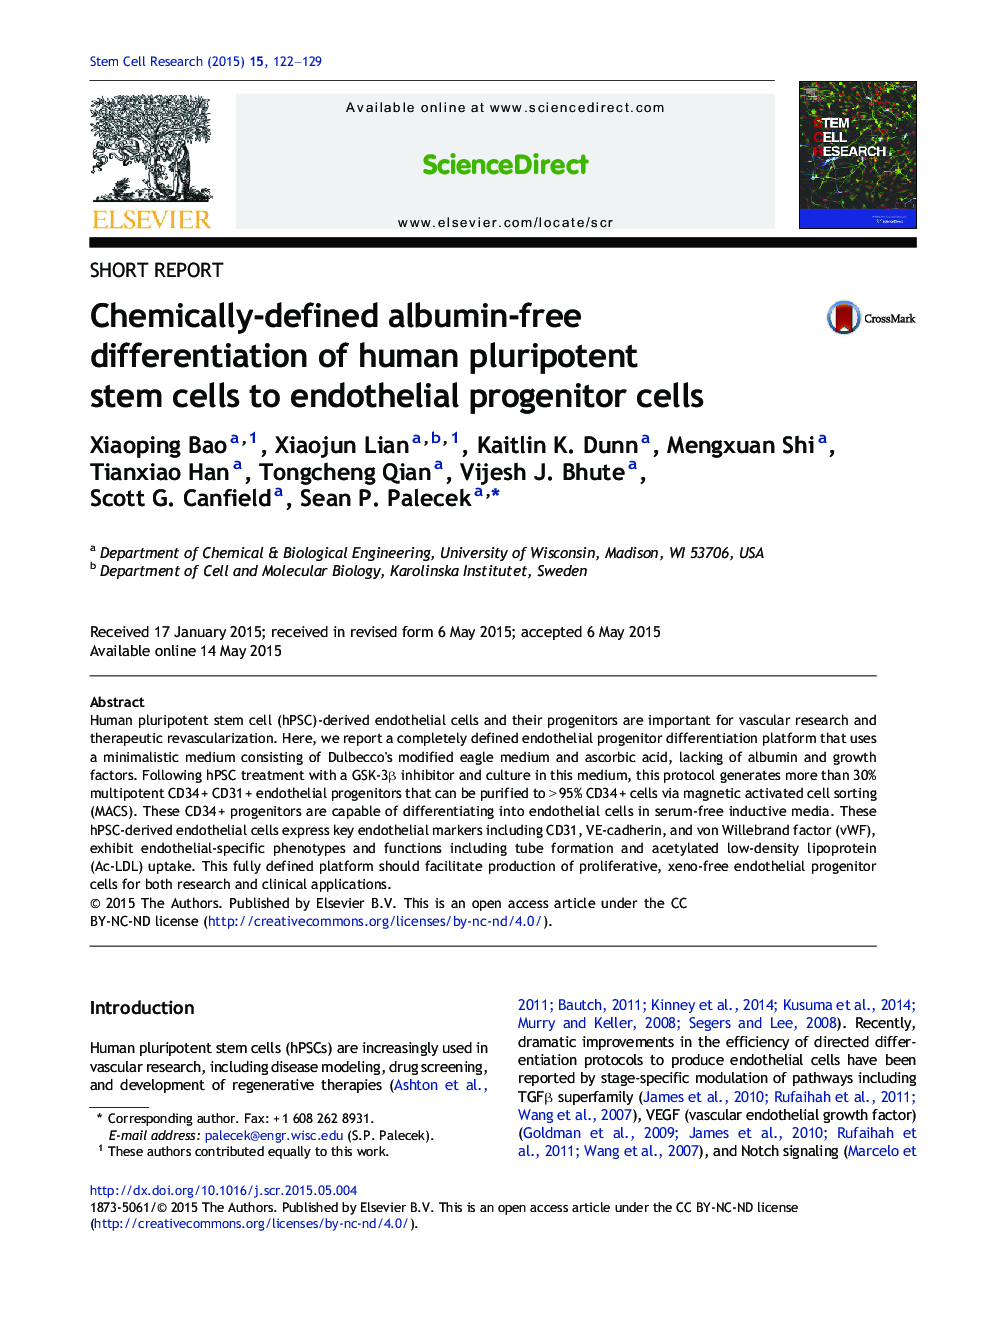 Chemically-defined albumin-free differentiation of human pluripotent stem cells to endothelial progenitor cells